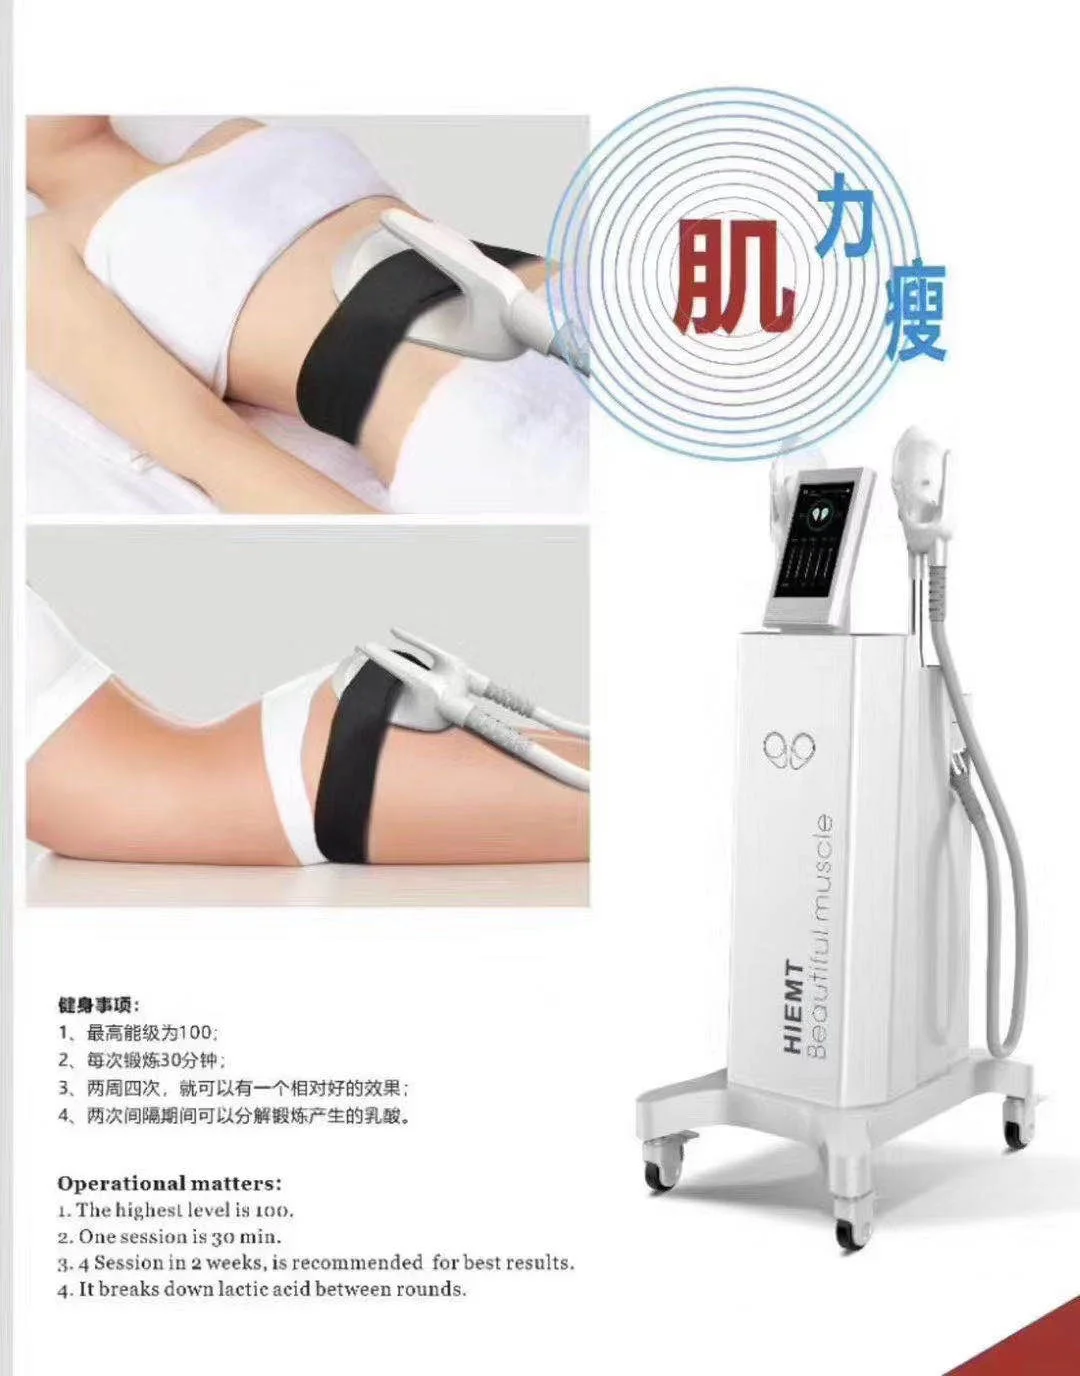 Electromagnetic Non-Invasive Body Shaping Muscles Stimulate Ems culpting Body Firming Machine